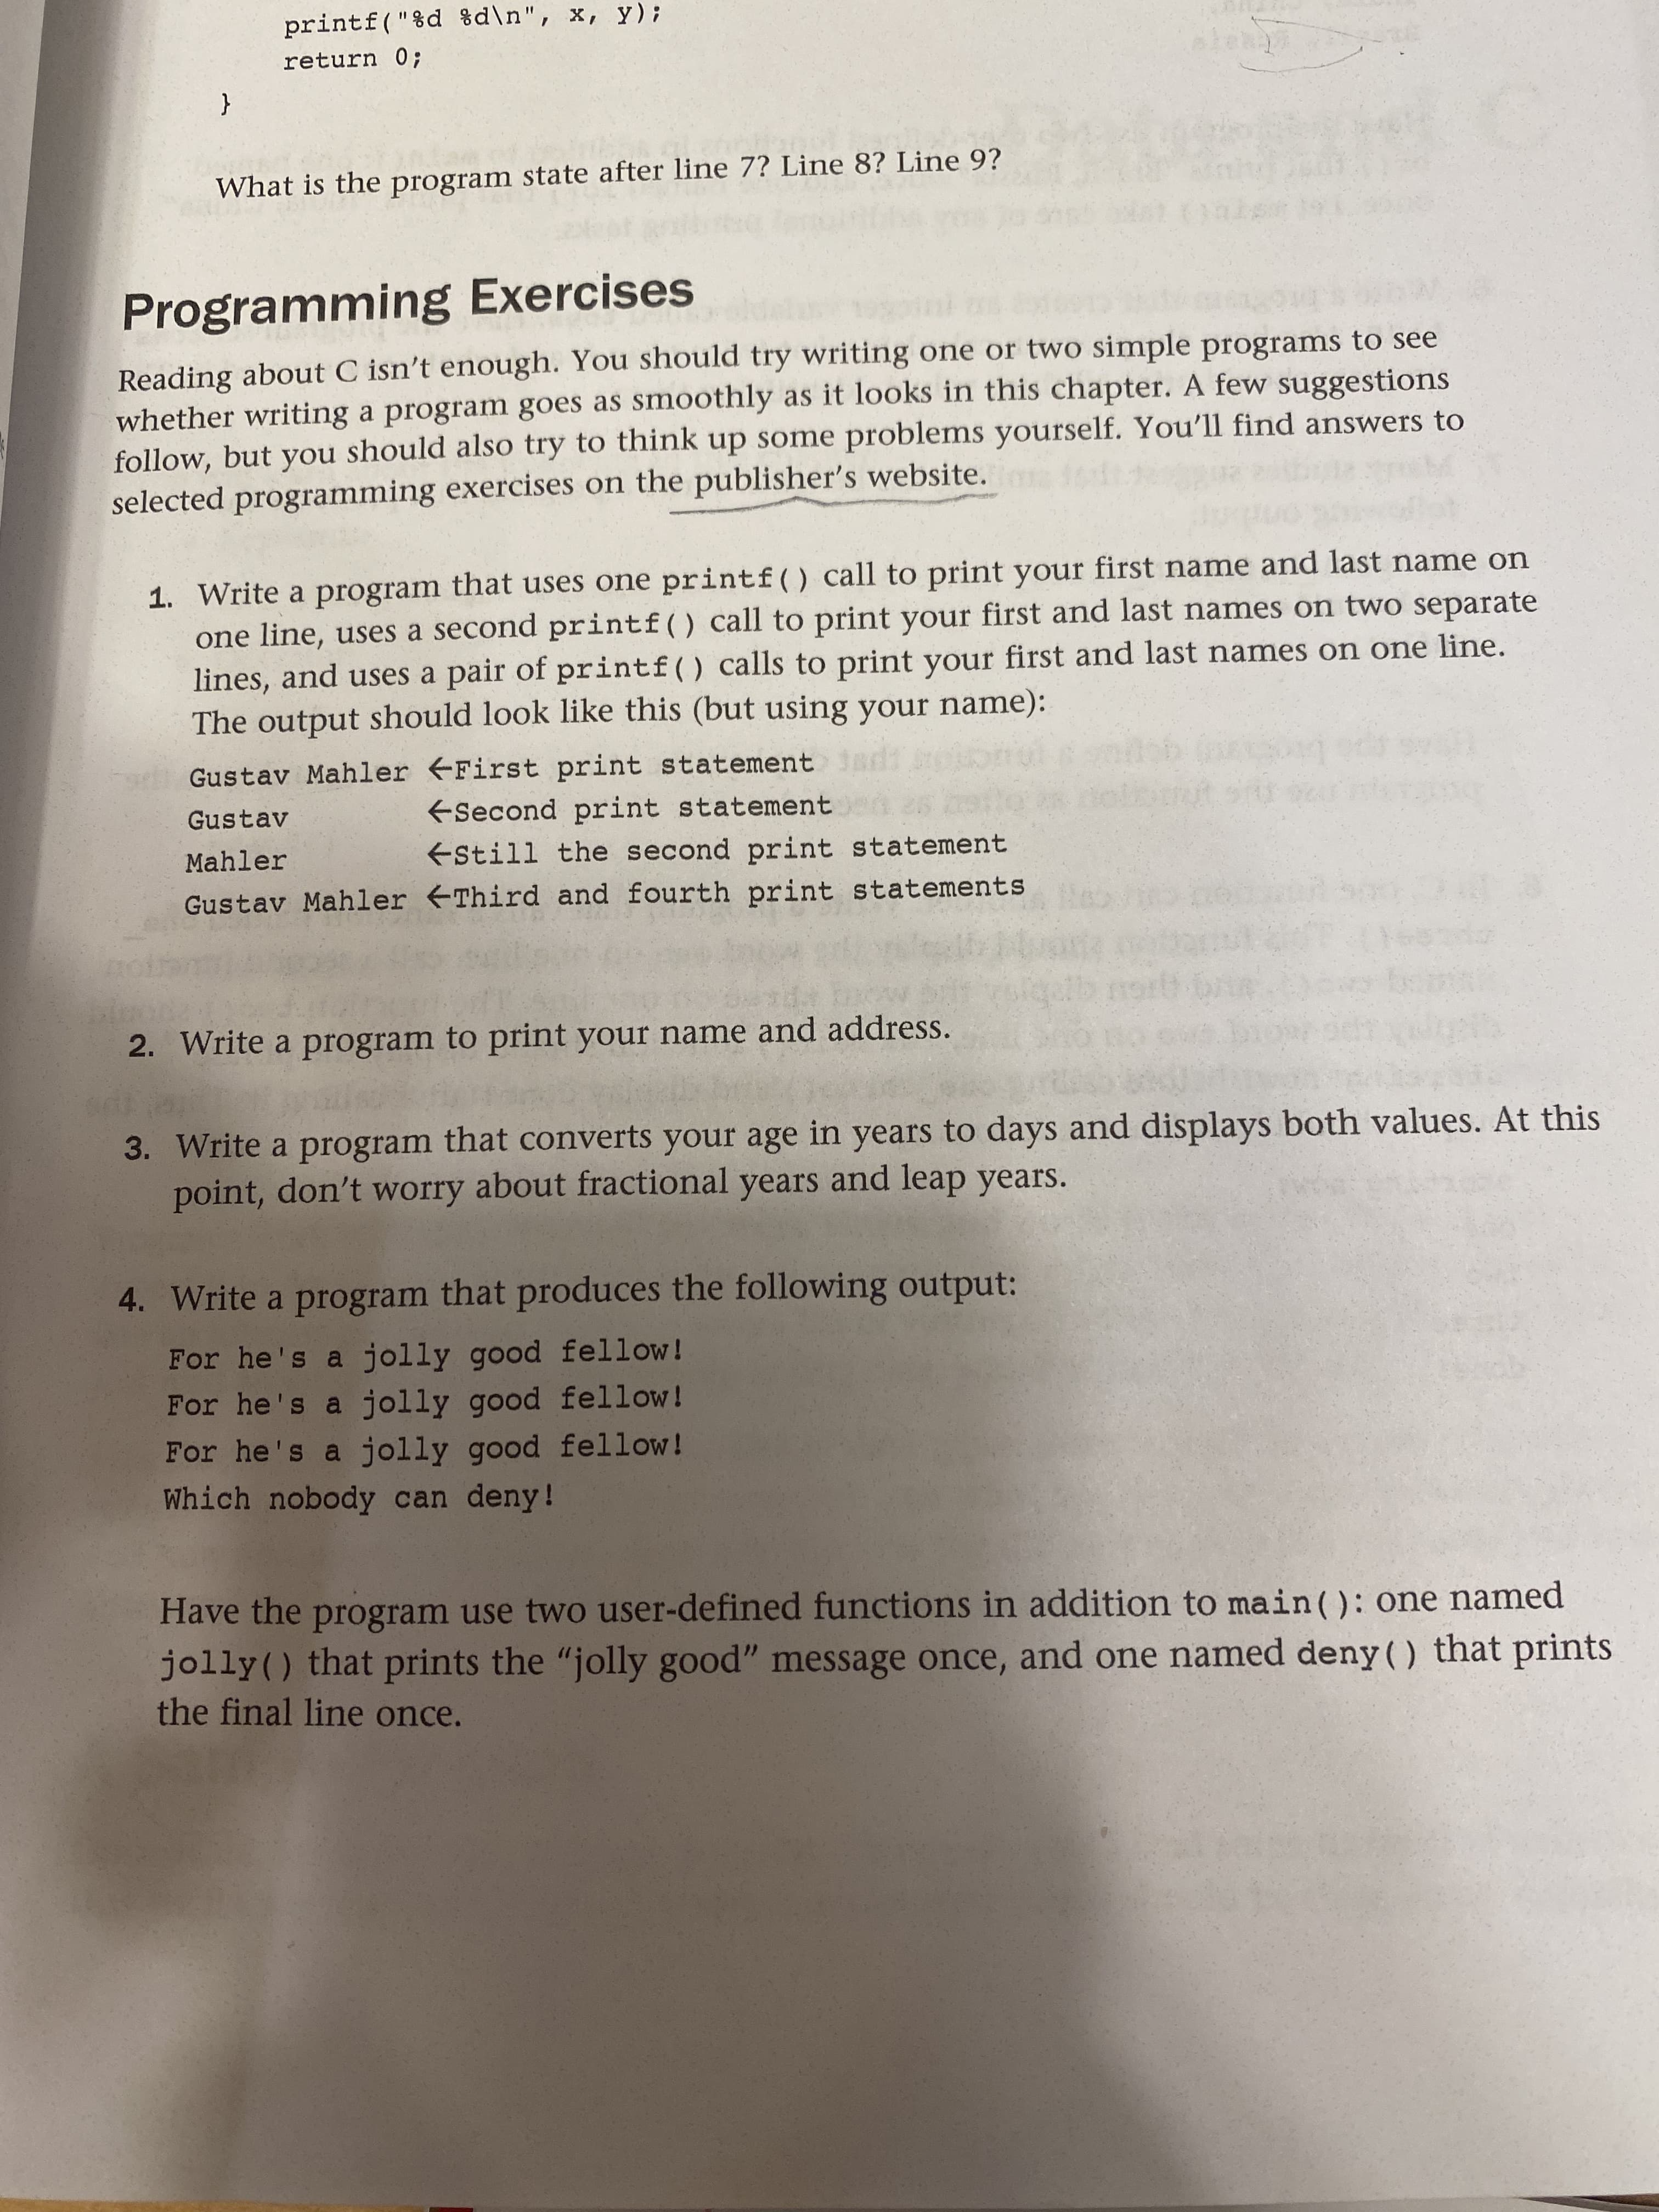 printf("%d %d\n", x, y);
return 0;
{
What is the program state after line 7? Line 8? Line 9?
Programming Exercises
Reading about C isn't enough. You should try writing one or two simple programs to see
whether writing a program goes as smoothly as it looks in this chapter. A few suggestions
follow, but you should also try to think up some problems yourself. You'll find answers to
selected programming exercises on the publisher's website.
1. Write a program that uses one printf() call to print your first name and last name on
one line, uses a second printf() call to print your first and last names on two separate
lines, and uses a pair of printf() calls to print your first and last names on one line.
The output should look like this (but using your name):
Gustav Mahler First print statement
ESecond print statement
Gustav
Mahler
EStill the second print statement
Gustav Mahler Third and fourth print statements
2. Write a program to print your name and address.
3. Write a program that converts your age in years to days and displays both values. At this
point, don't worry about fractional years and leap years.
4. Write a program that produces the following output:
For he's a jolly good fellow!
For he's a jolly good fellow!
For he's a jolly good fellow!
Which nobody can deny!
Have the program use two user-defined functions in addition to main(): one named
jolly() that prints the "jolly good" message once, and one named deny() that prints
the final line once.
